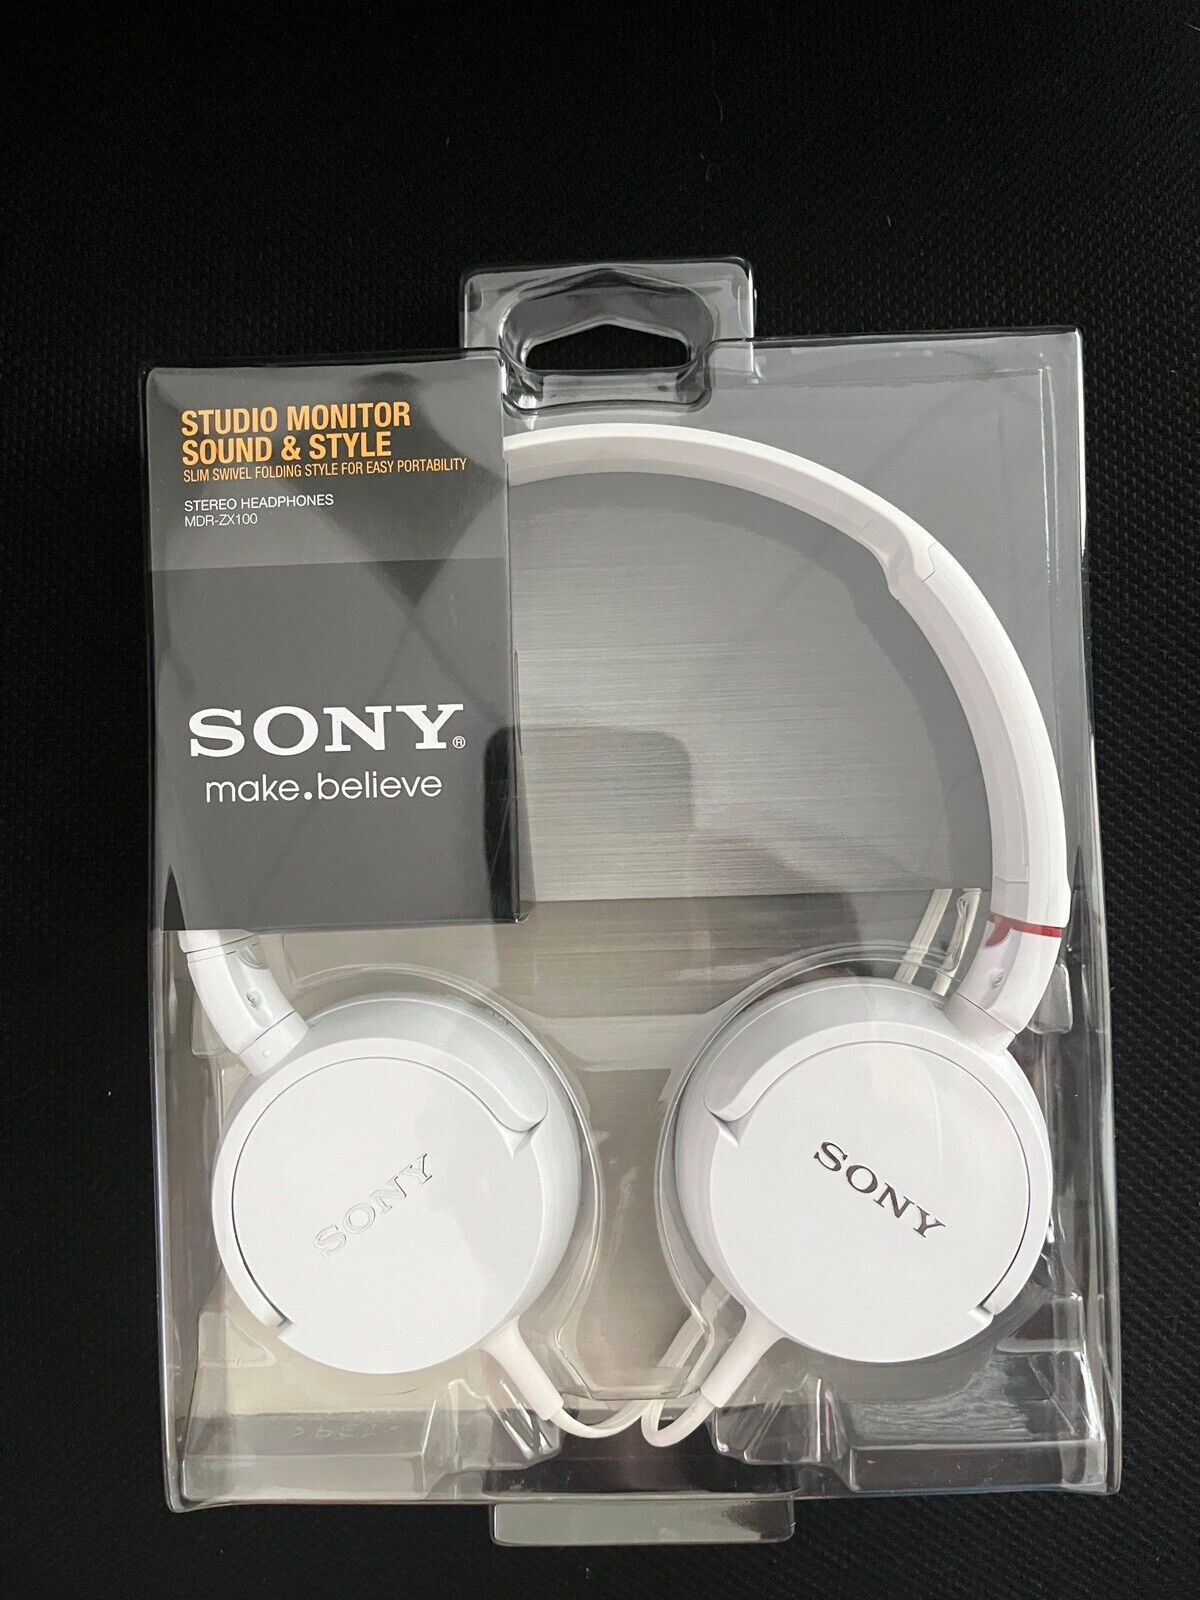 SONY Studio Monitor Stereo Headphone MDR-ZX100 White Brand New Sealed